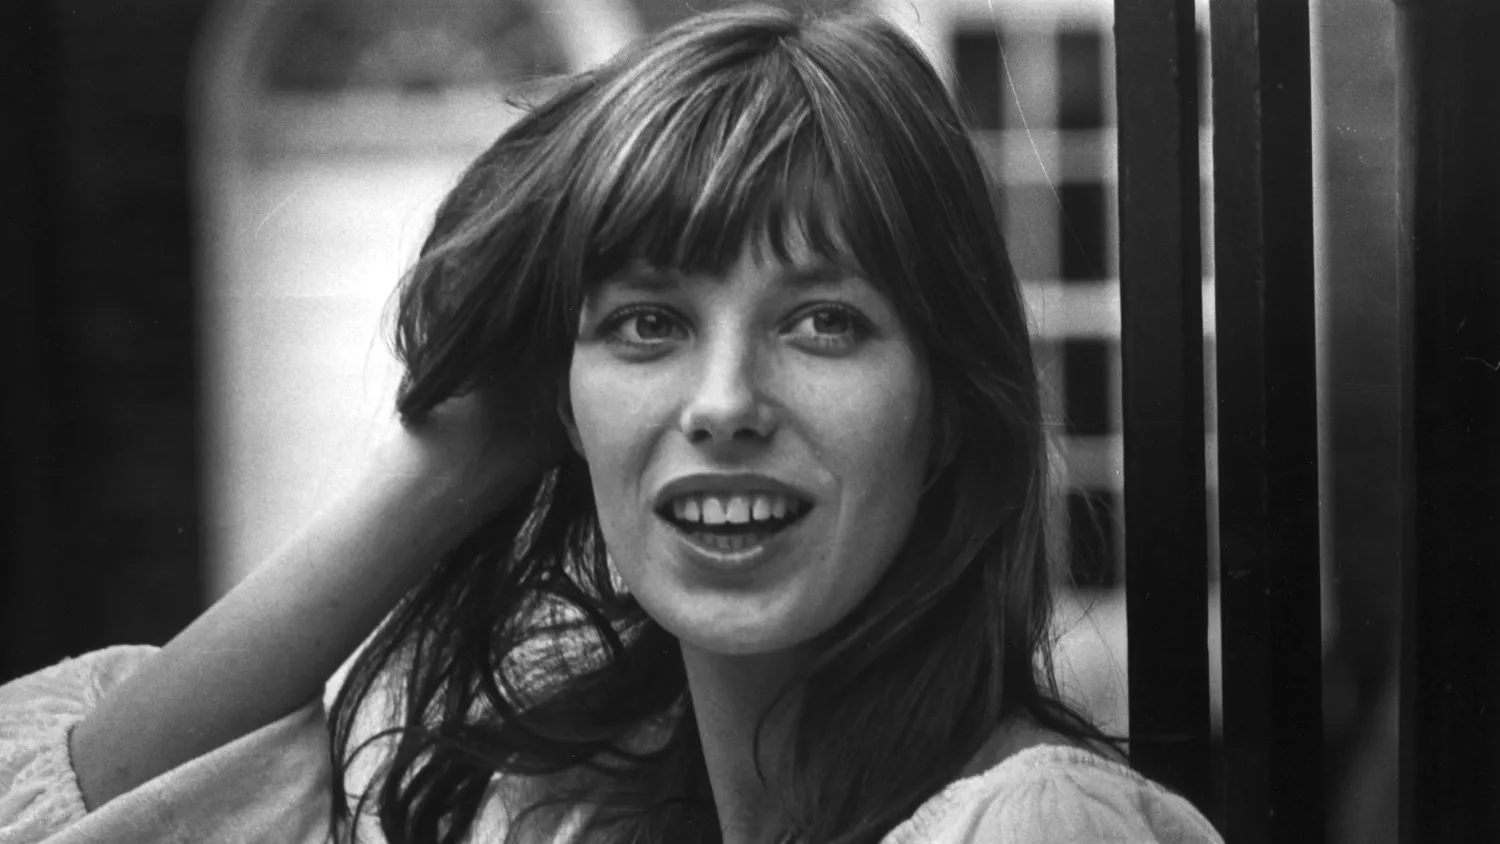 060123 Jane Birkin SOC d687a88cd418474b8ed7792c26a29d91 - WTX News Breaking News, fashion & Culture from around the World - Daily News Briefings -Finance, Business, Politics & Sports News